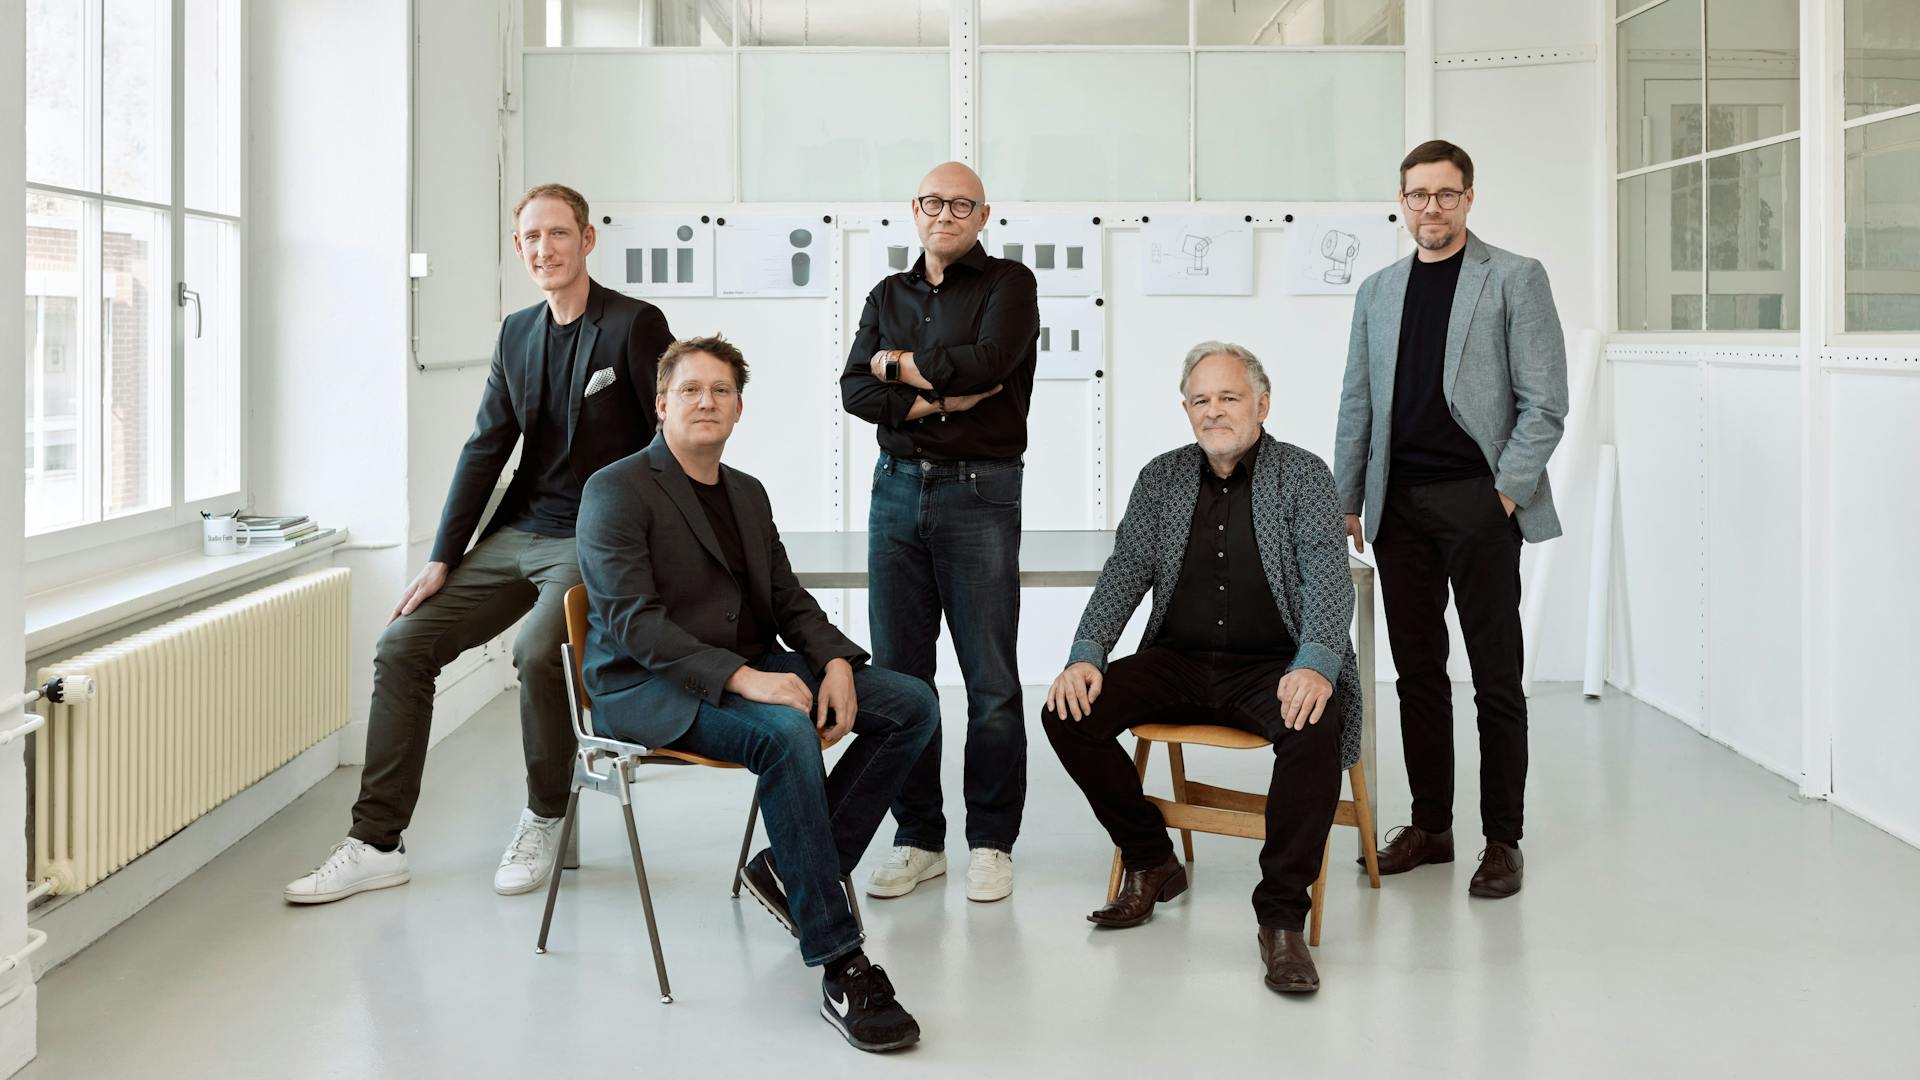 The designers from Stadler Form in a team image 2021